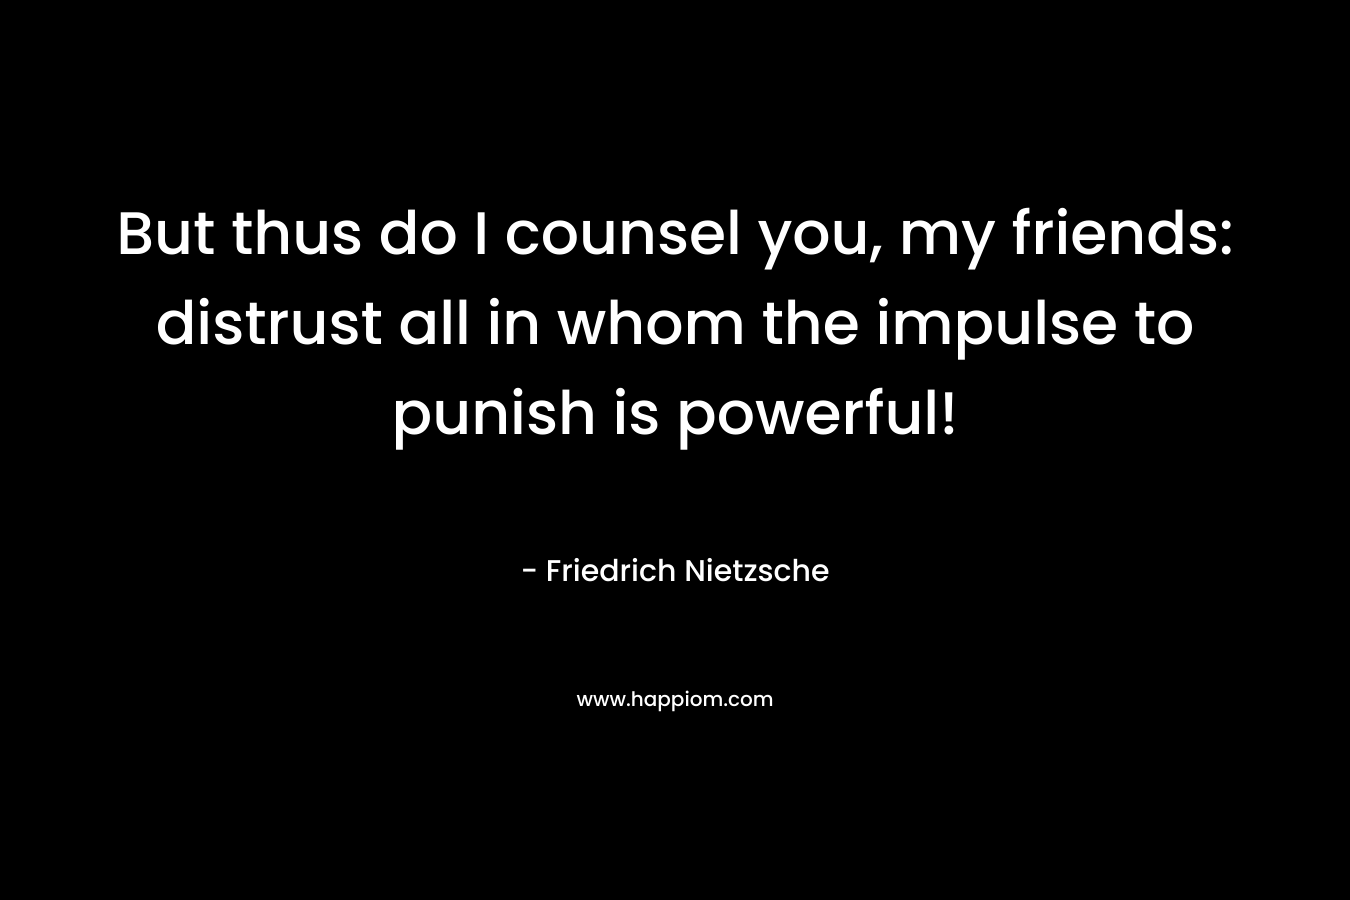 But thus do I counsel you, my friends: distrust all in whom the impulse to punish is powerful!